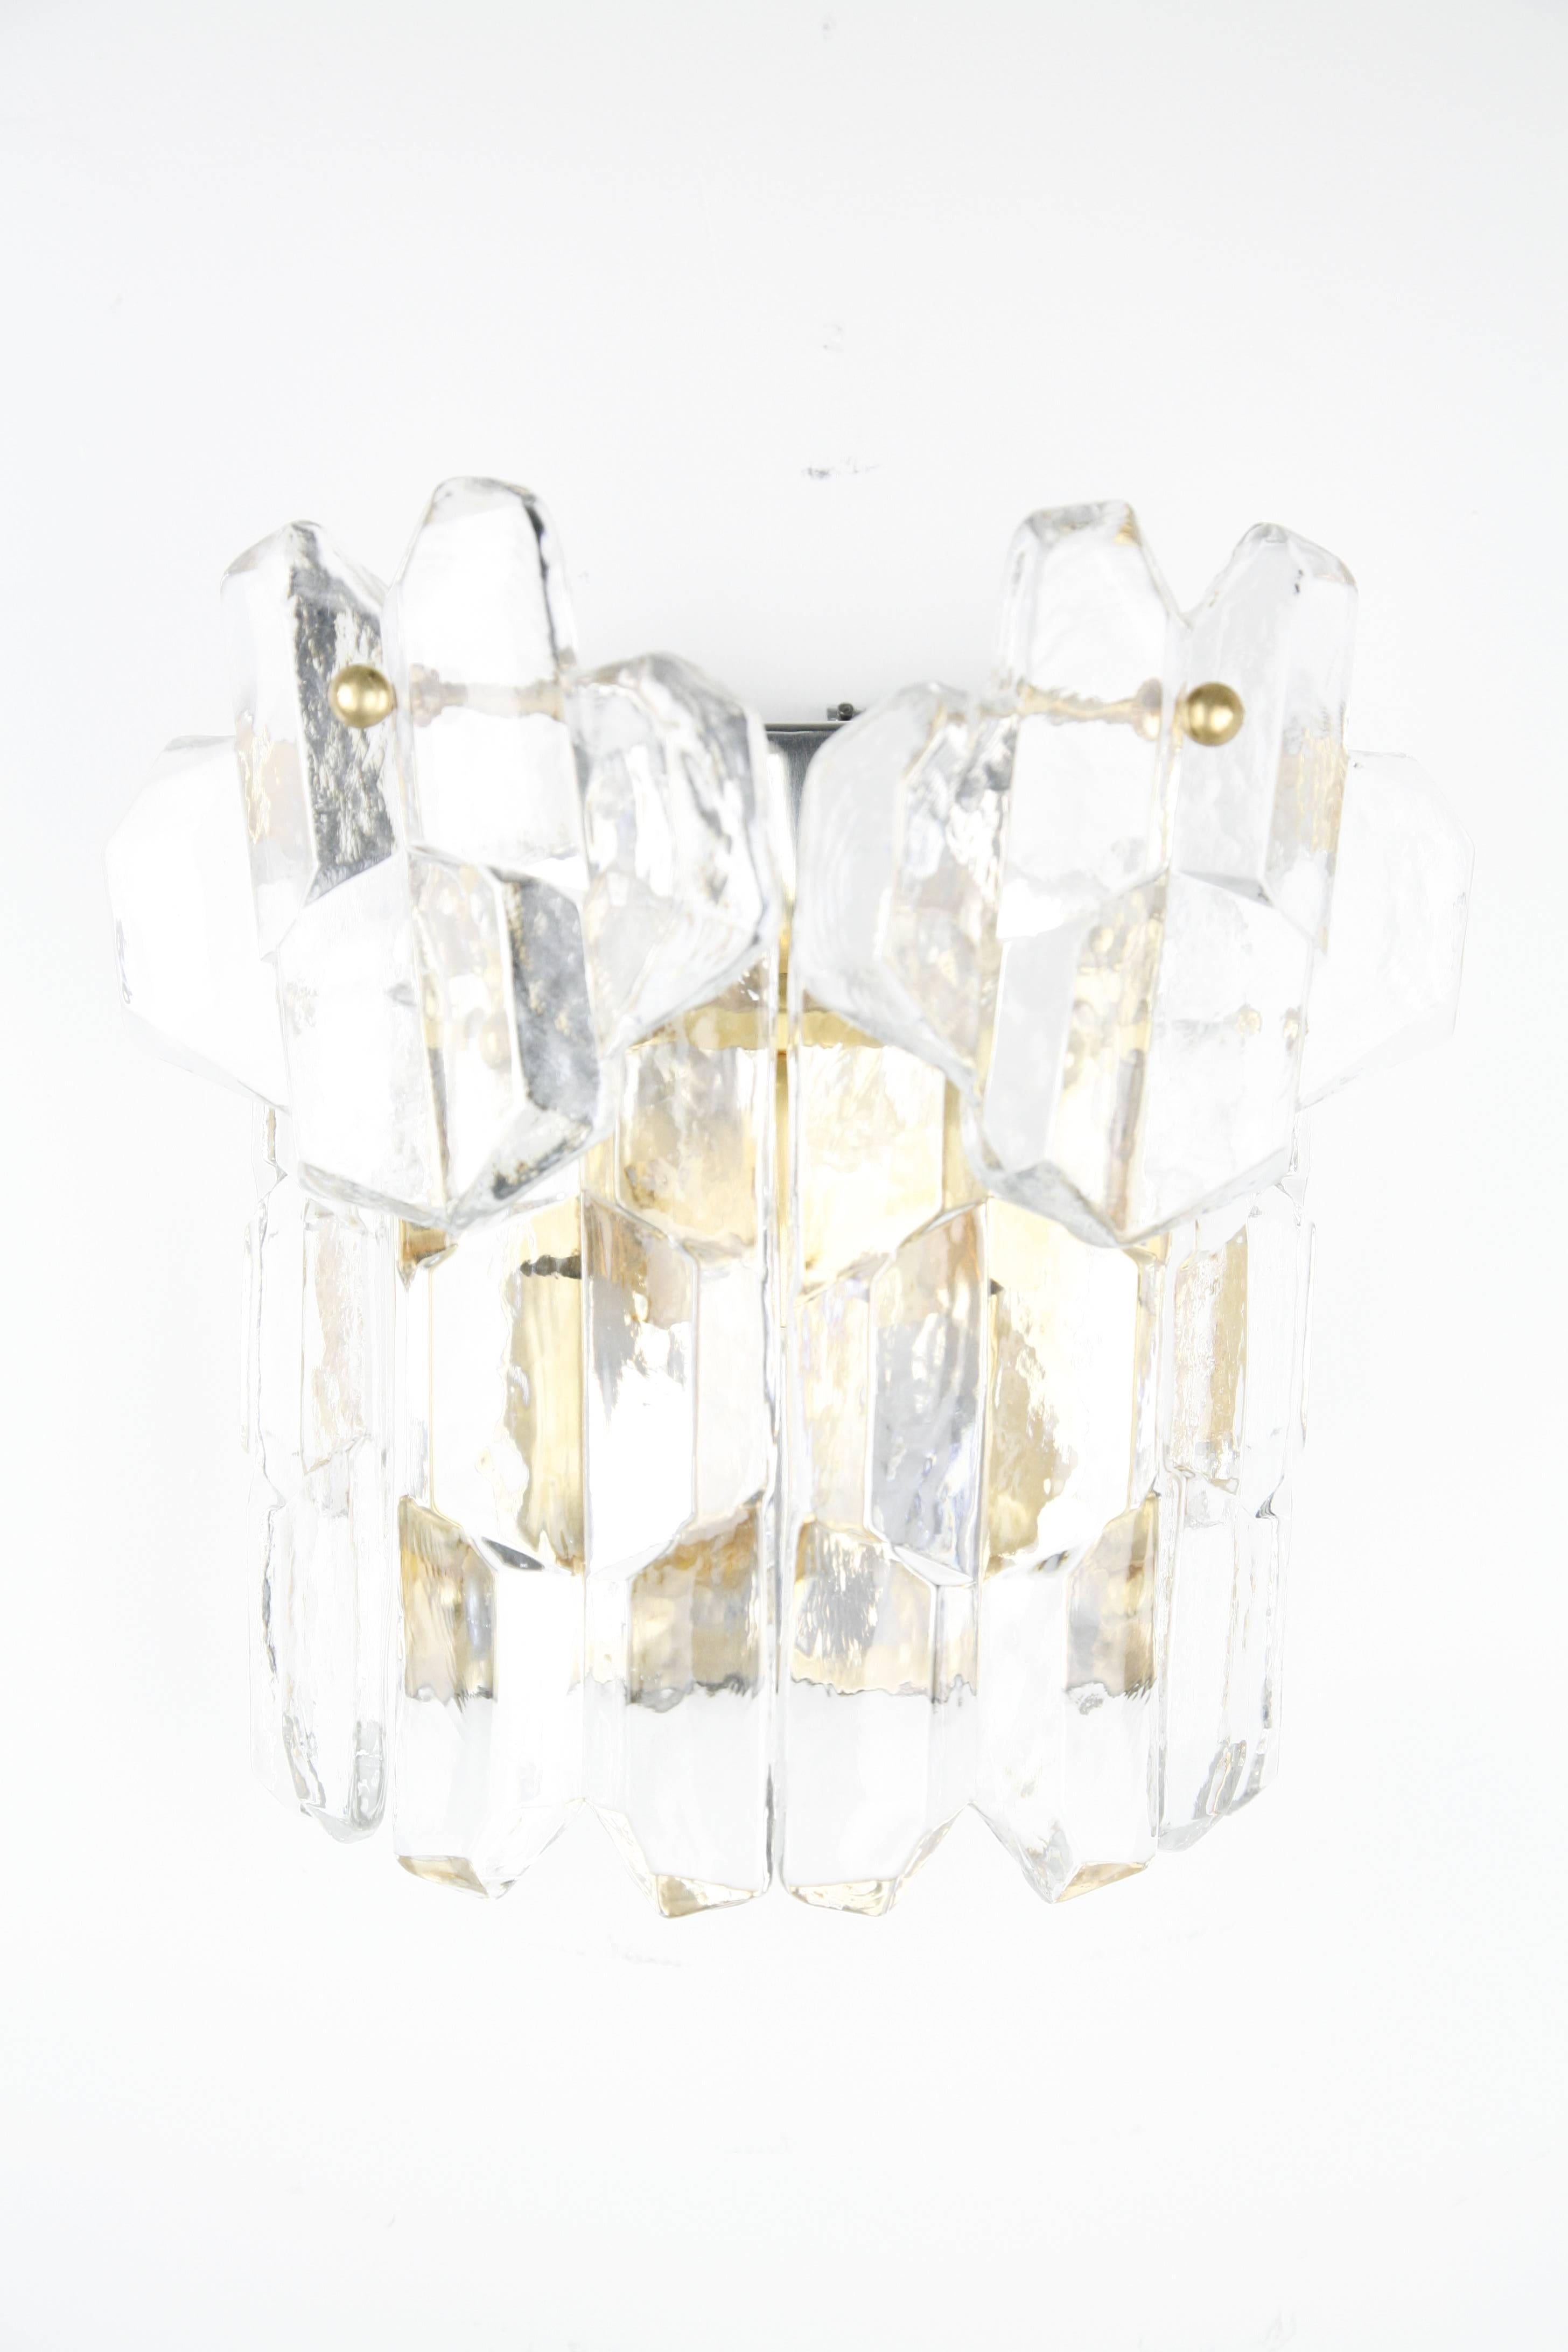 A single Kalmar palazzo crystal sconce 1970s Vienna Austria, six thick clear heavy pieces of crystal on a chrome frame that is 24-carat gilt, the frame has been polished over time so the chrome shine through behind the glass which is not visible